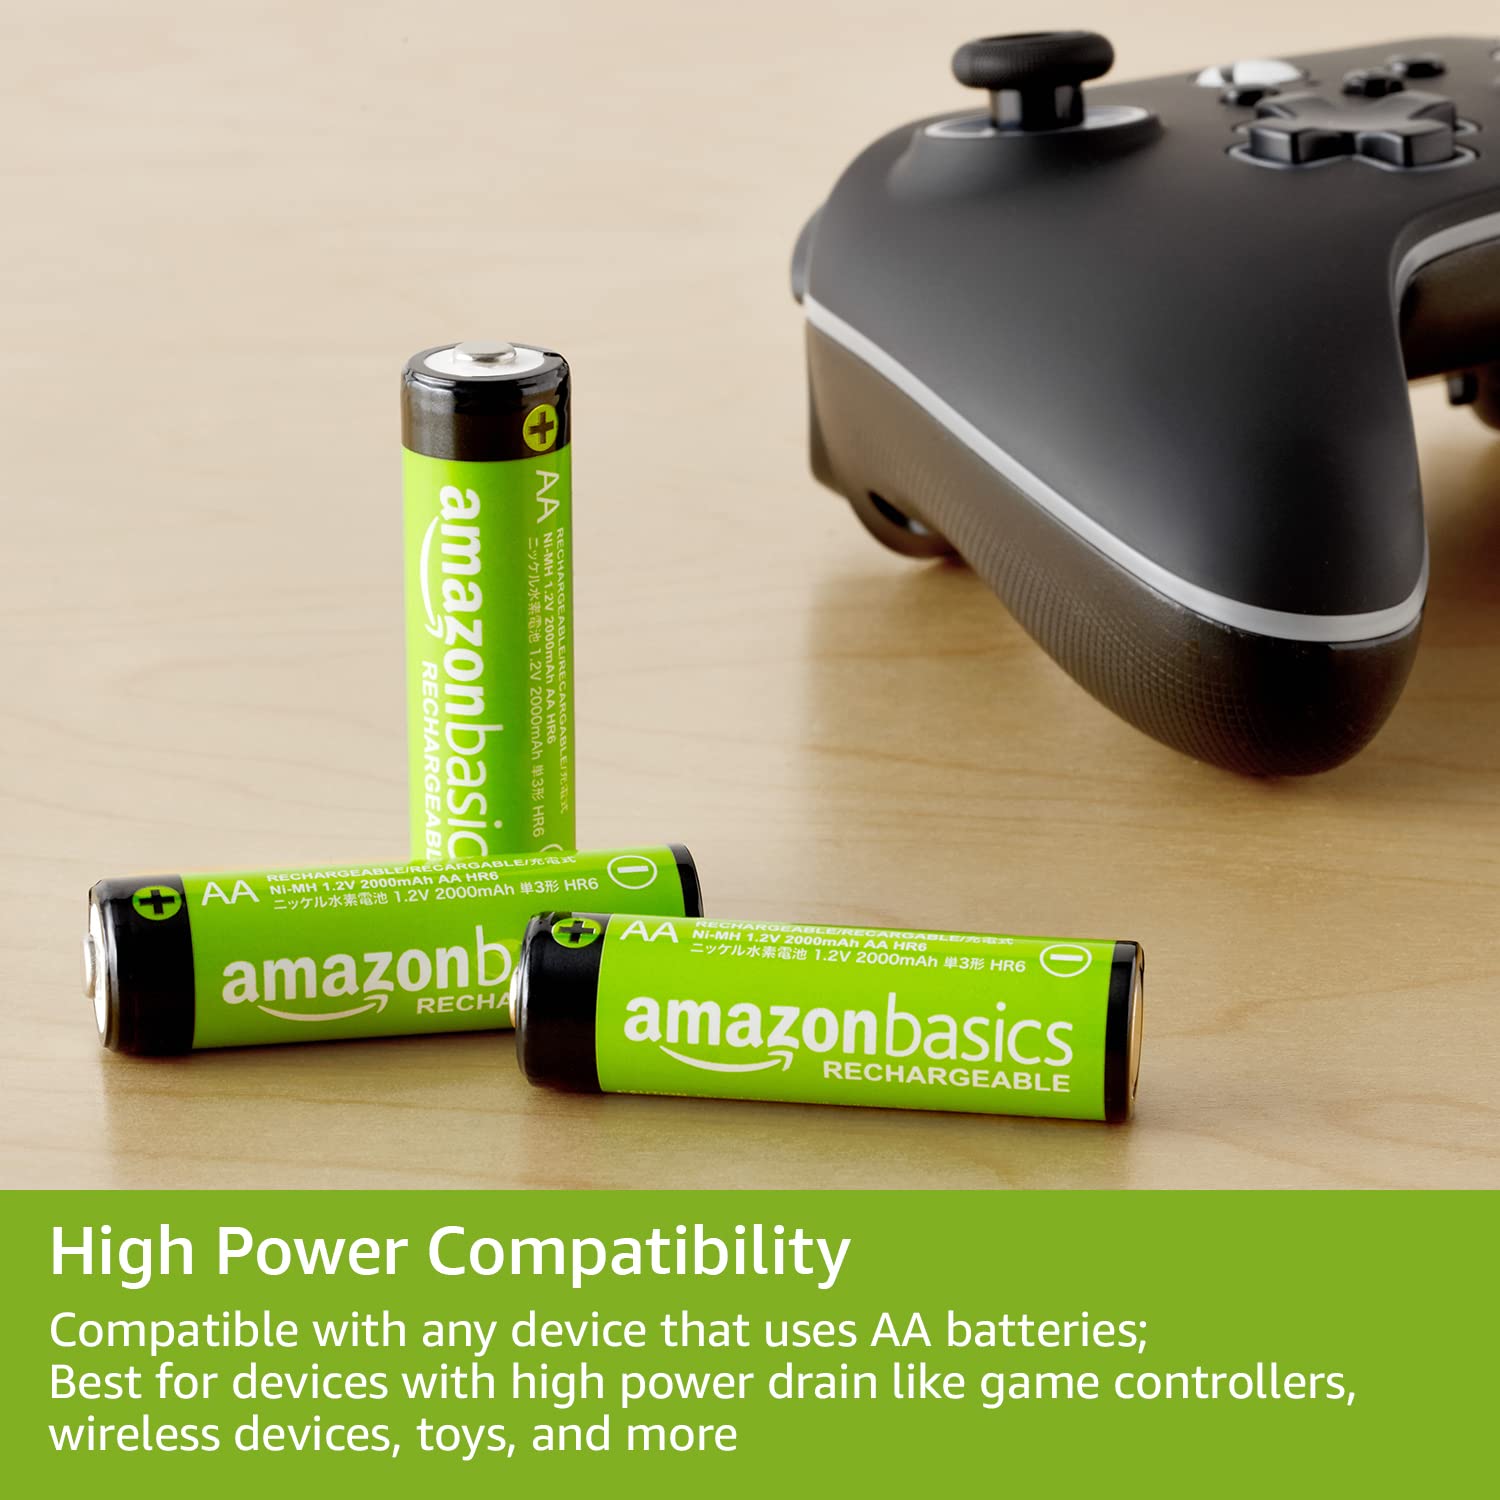 Amazon Basics Rechargeable AA NiMH High-Capacity Batteries, 2400 mAh, Recharge up to 400x, Pre-Charged - Pack of 12